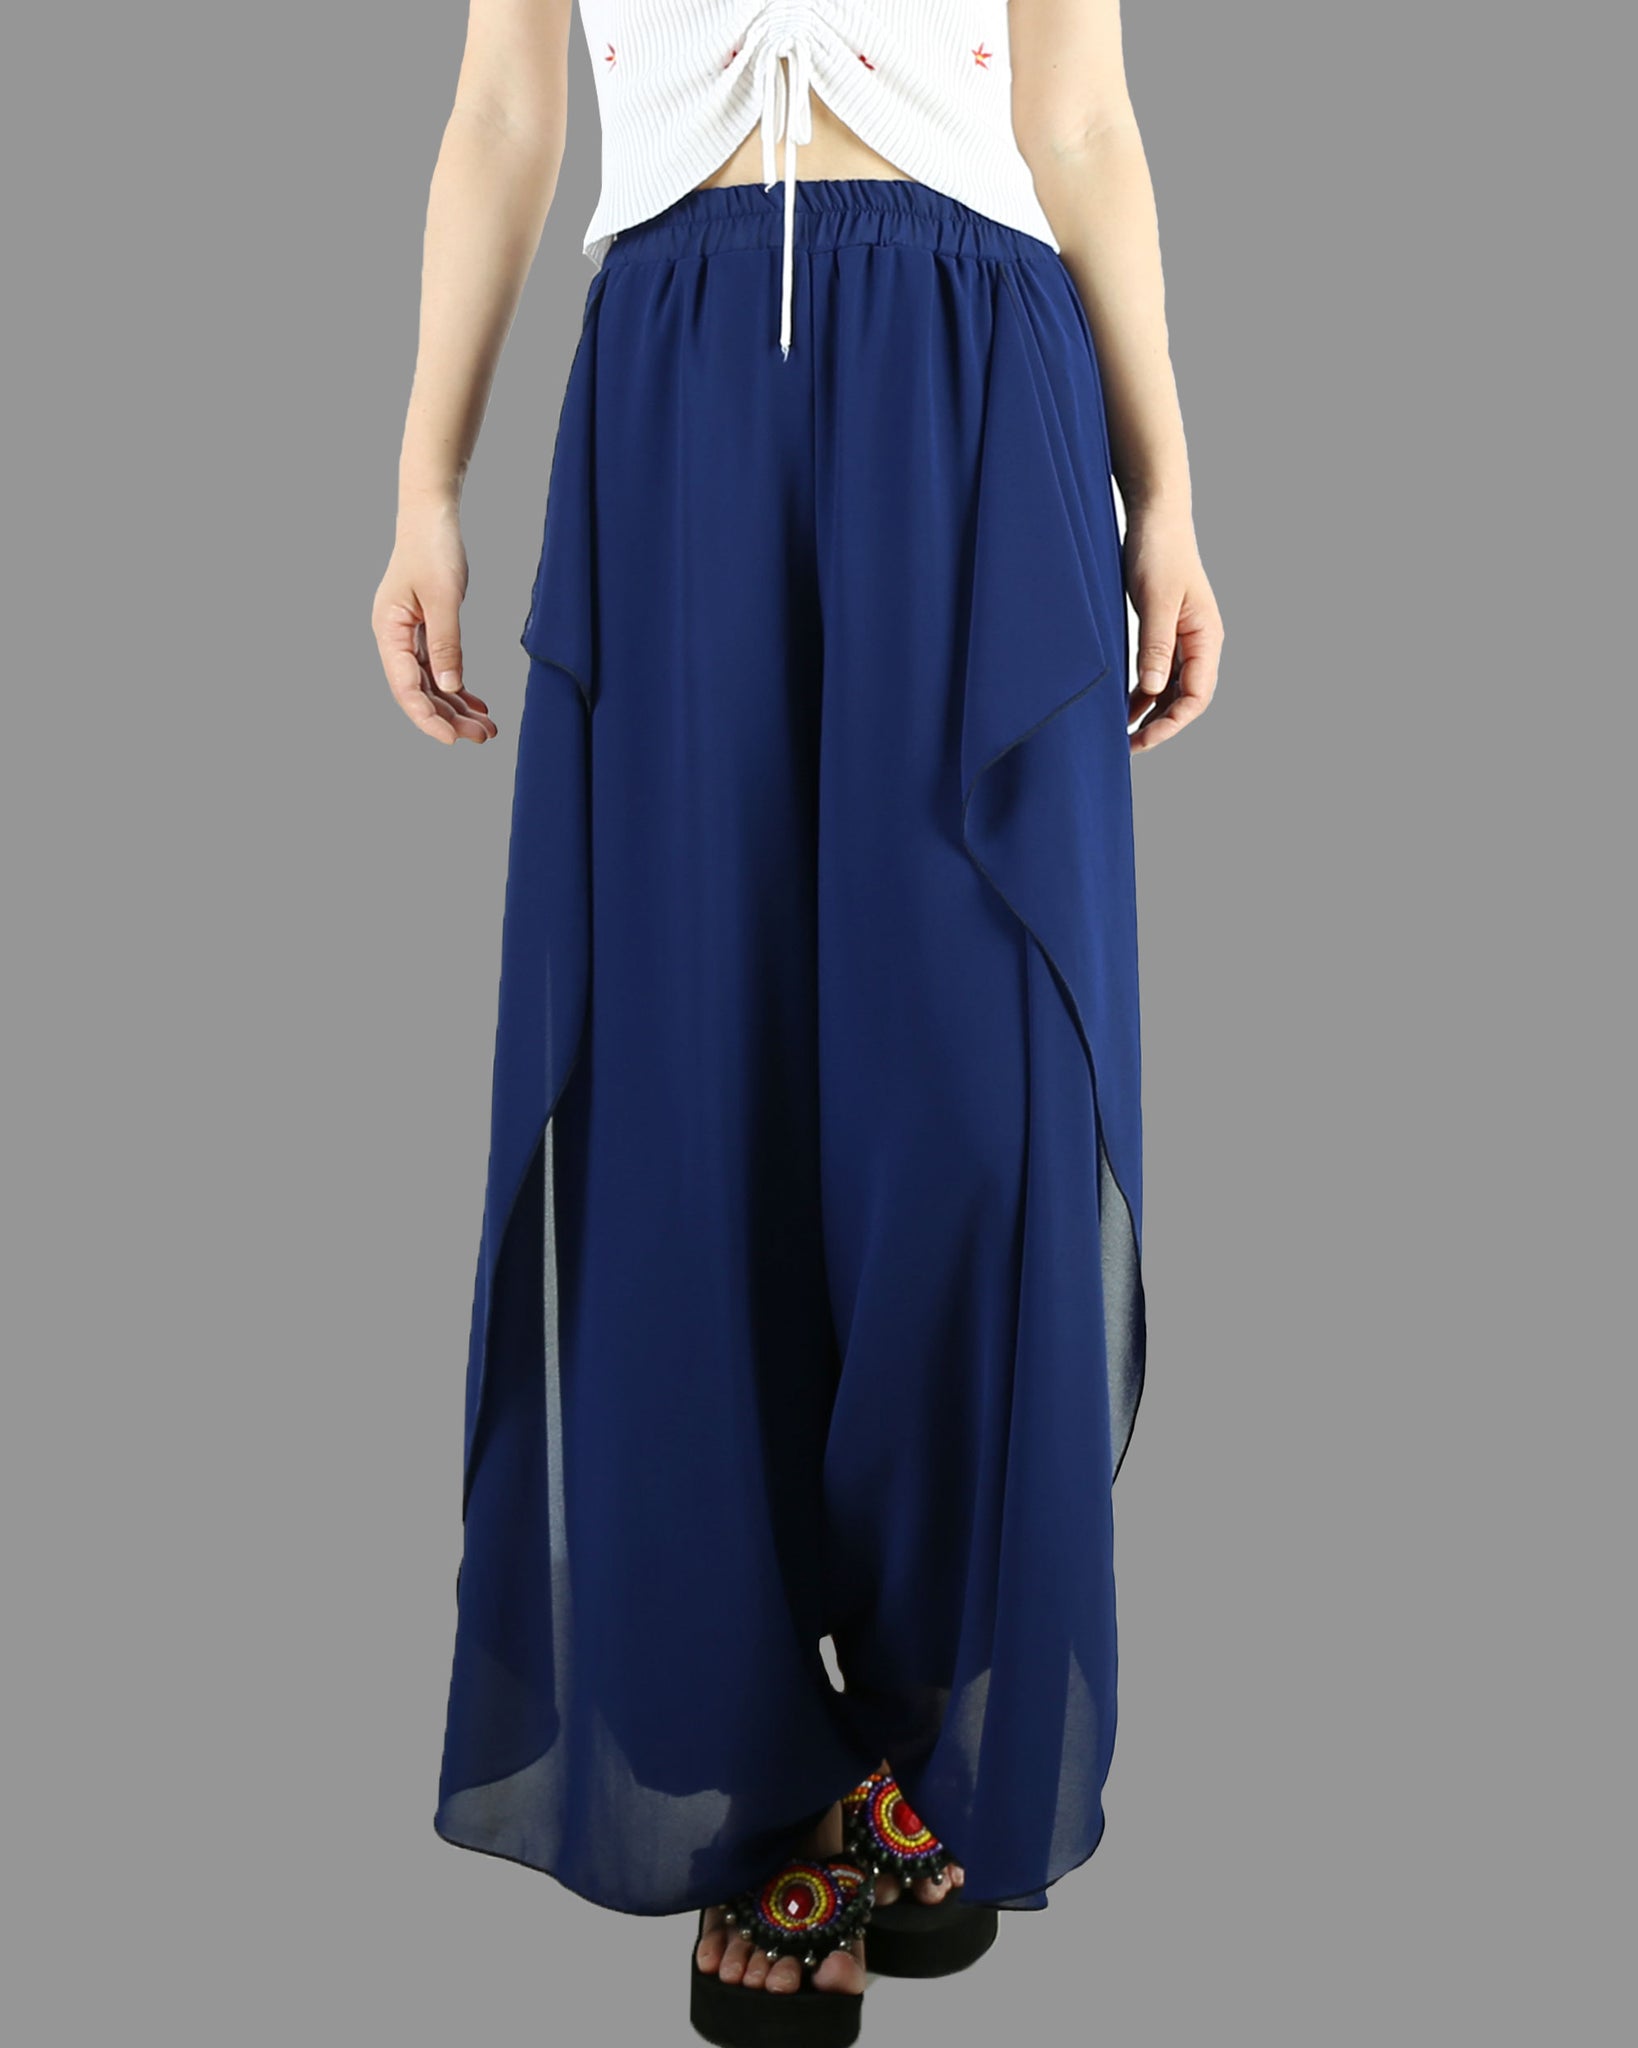 Pants | Womens Marni Blue marbled denim trousers with skirt overlay - Ana  Oraa